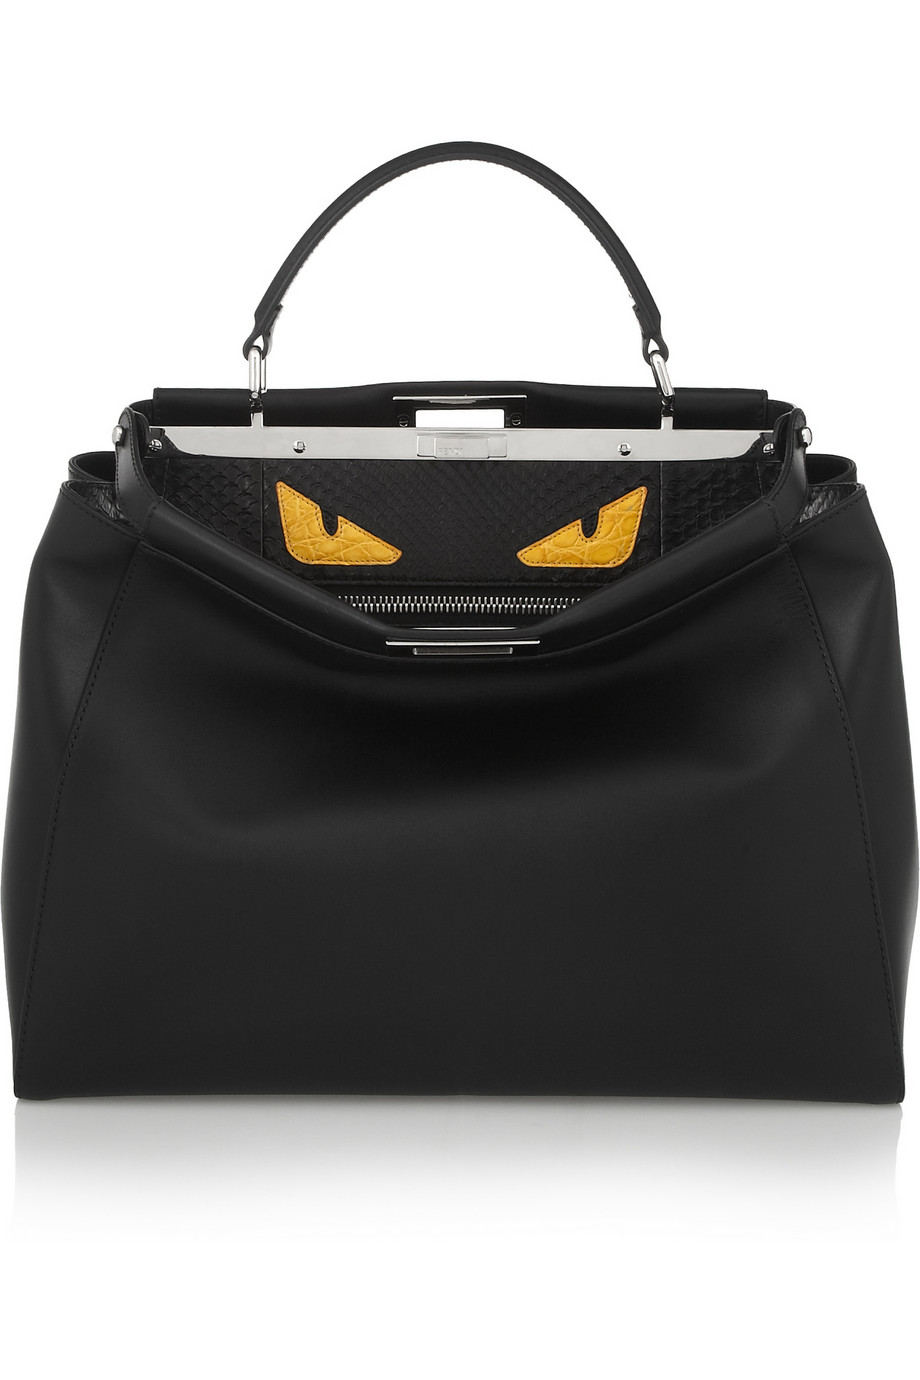 Fendi's Bag Bugs Capsule Collection | the CITIZENS of FASHION